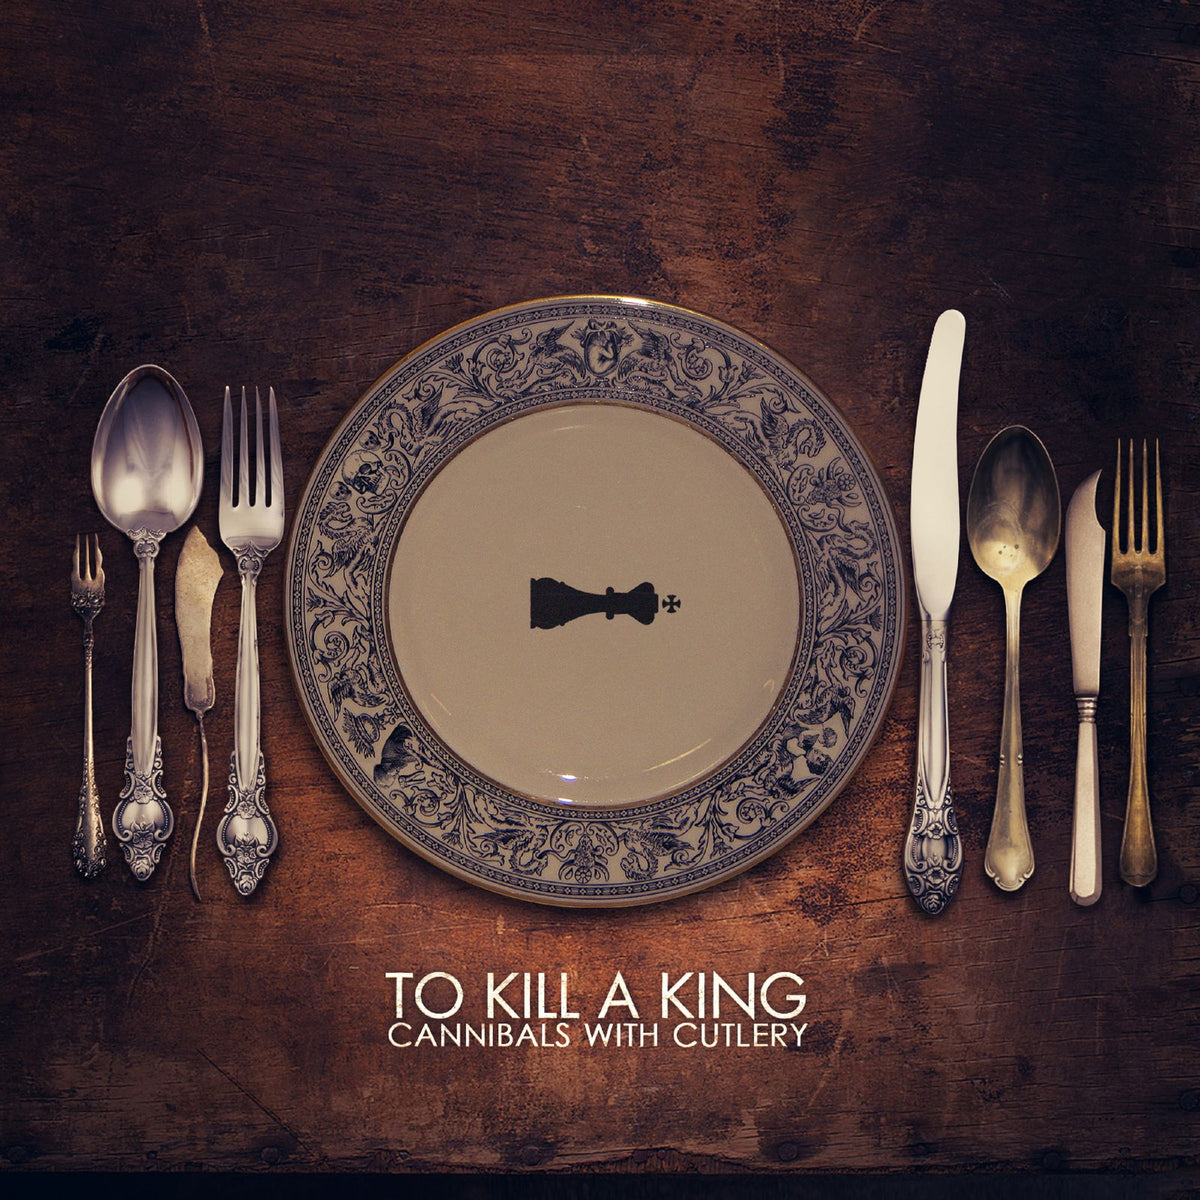 To Kill A King: Cannibals With Cutlery